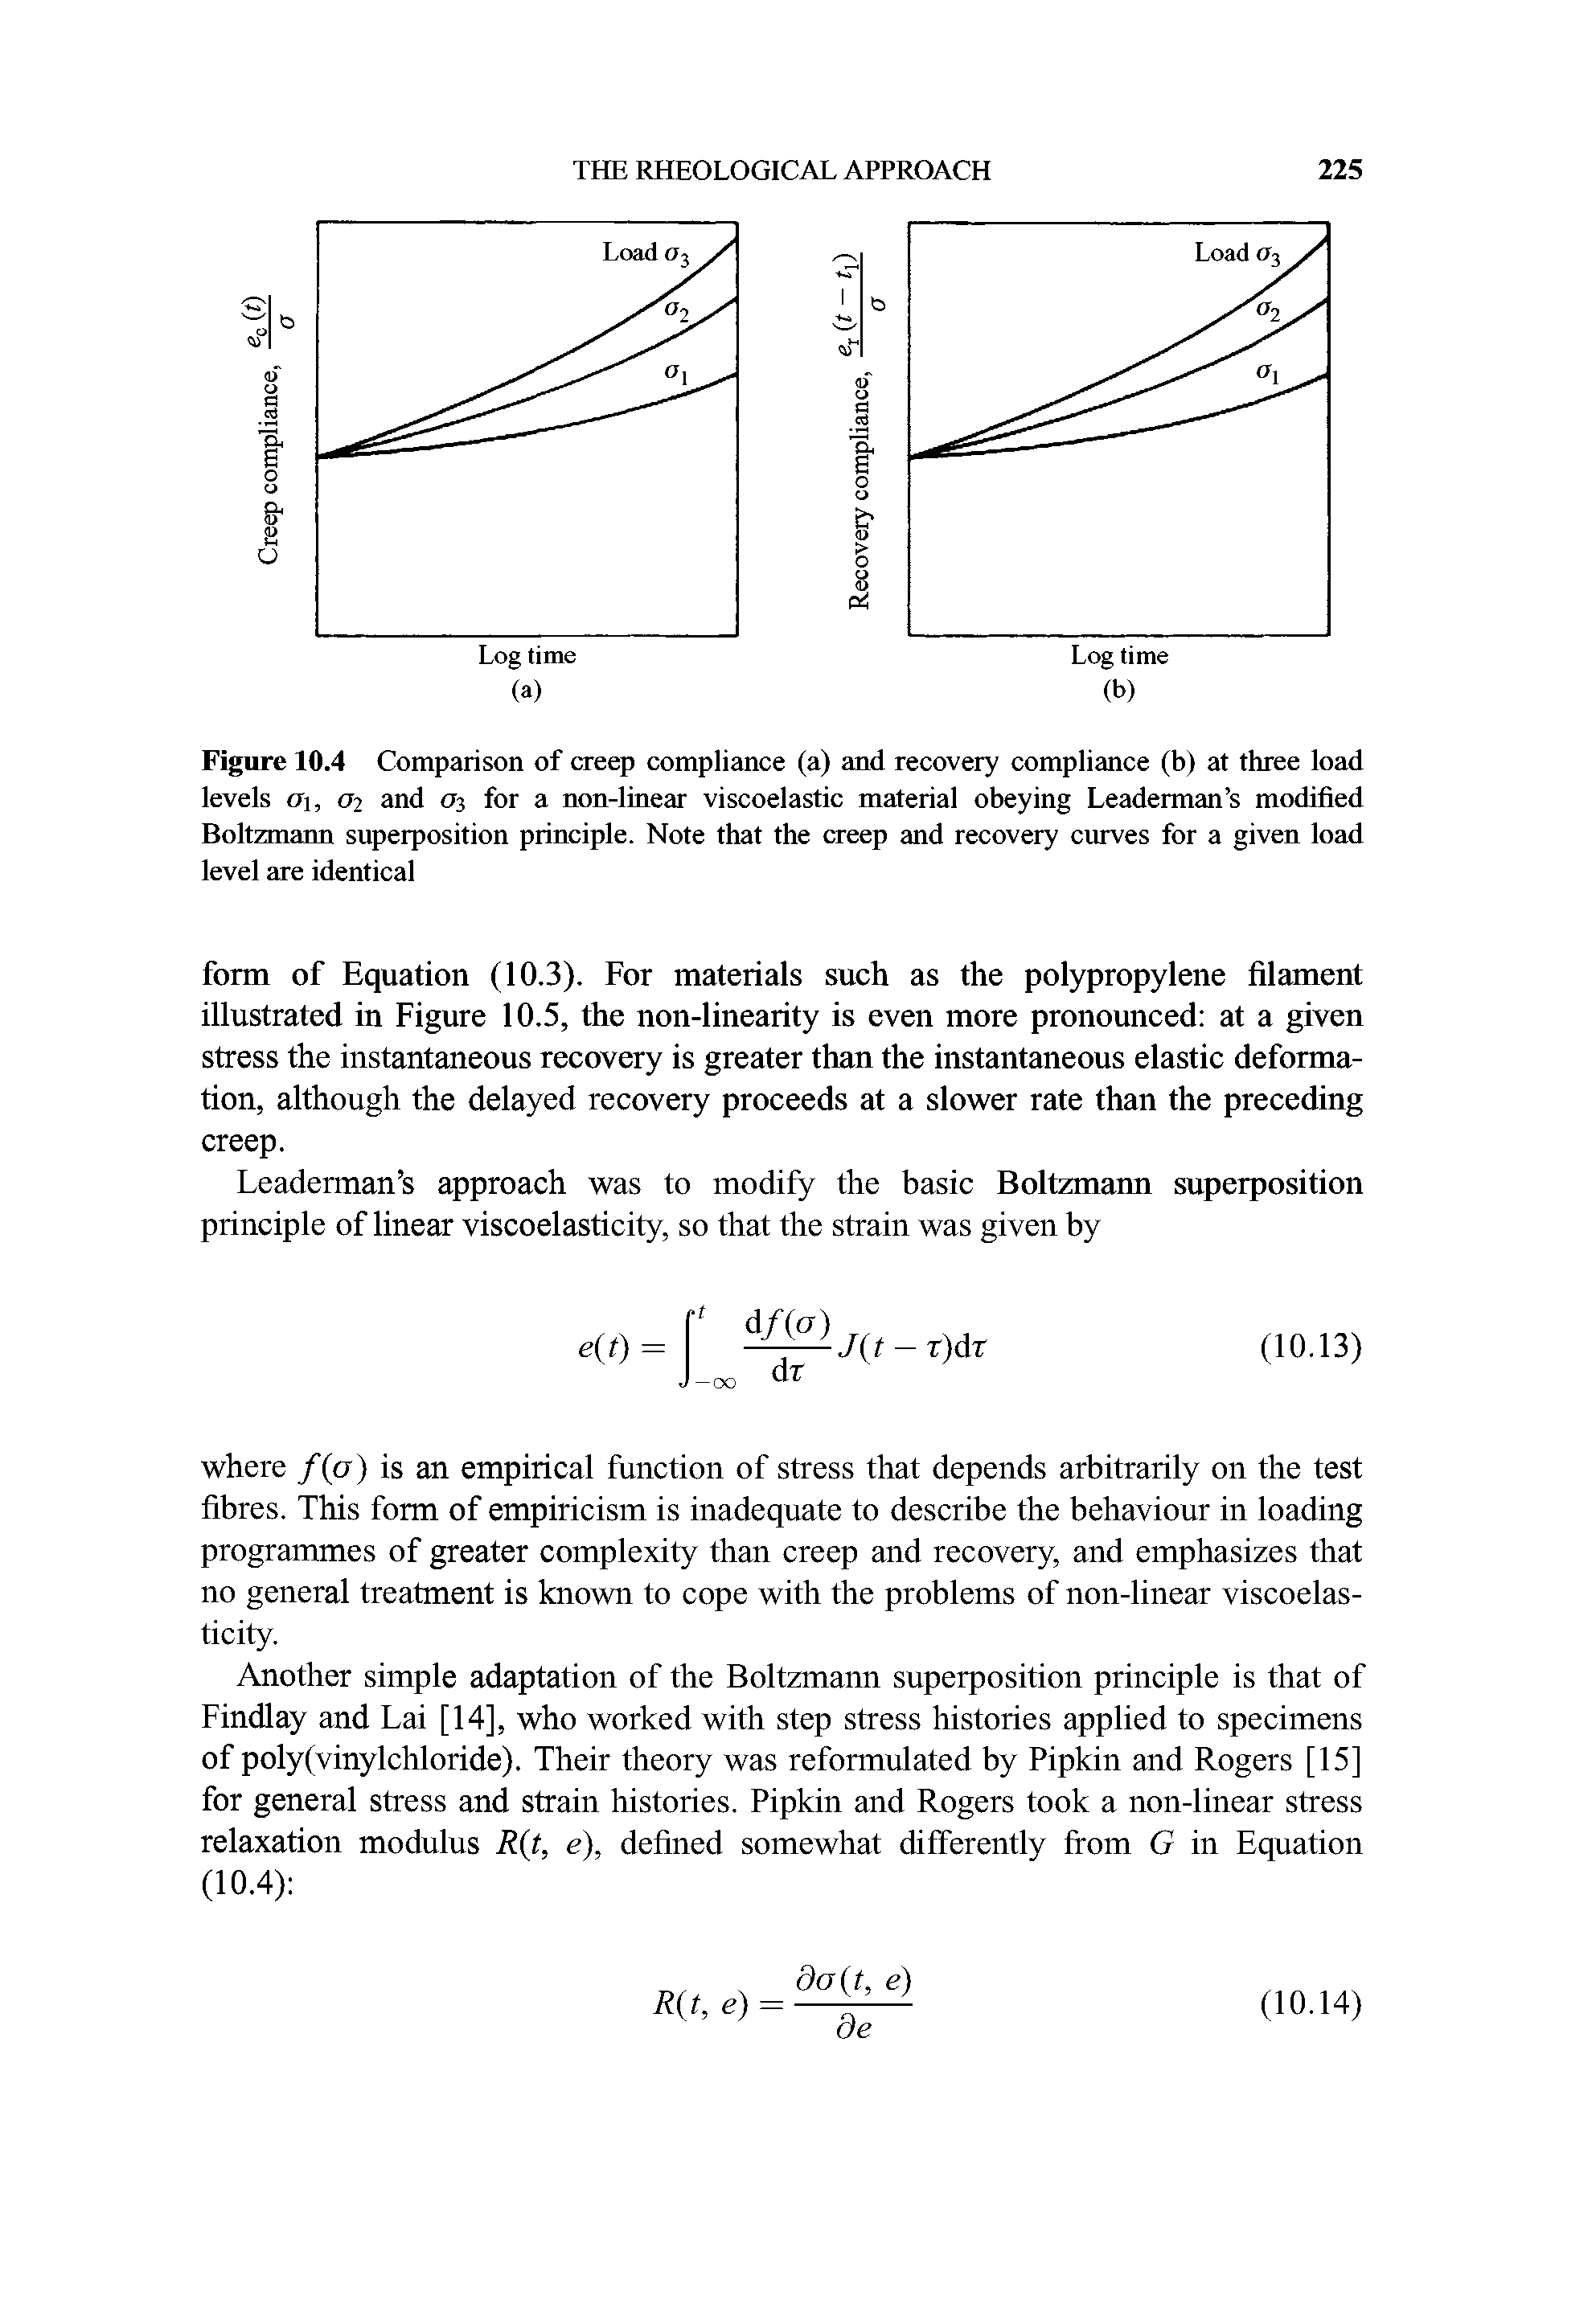 Figure 10.4 Comparison of creep compliance (a) and recovery compliance (b) at three load levels cTi, <72 and <73 for a non-linear viscoelastic material obeying Leaderman s modified Boltzmann superposition principle. Note that the creep and recovery ciuves for a given load level are identical...